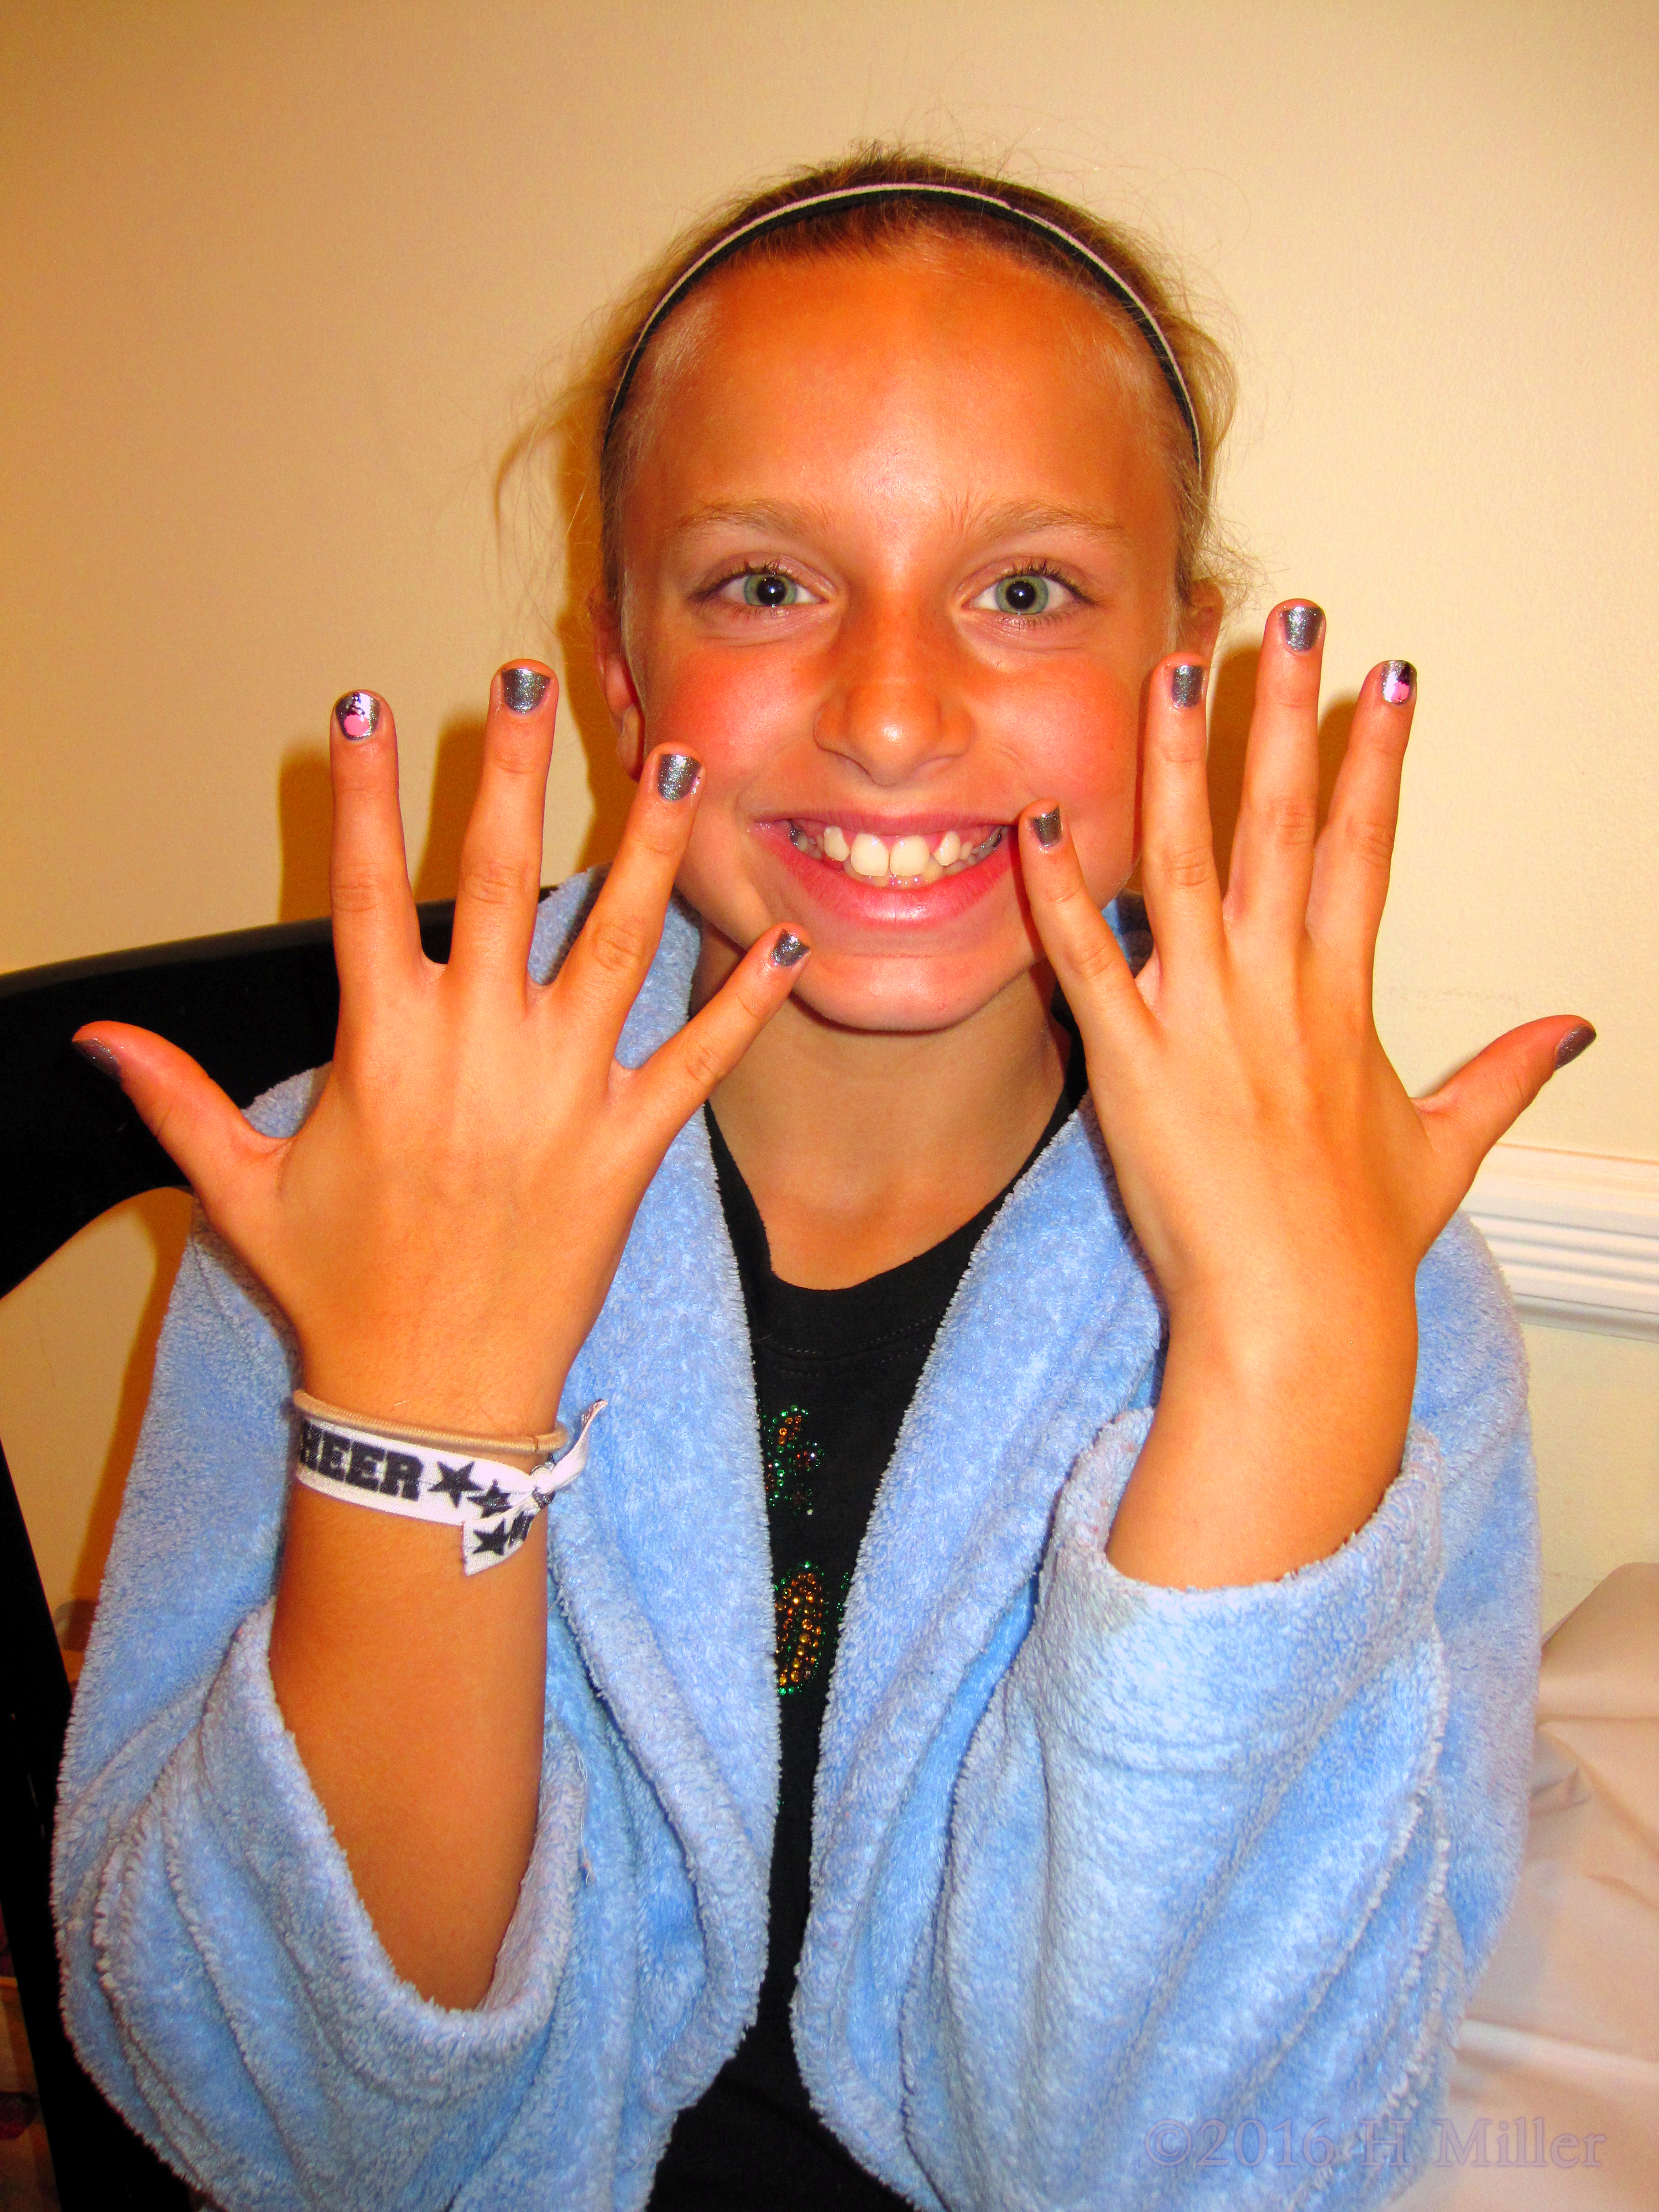 Smiling With Her New Nail Design On Her Kids Manicure! 